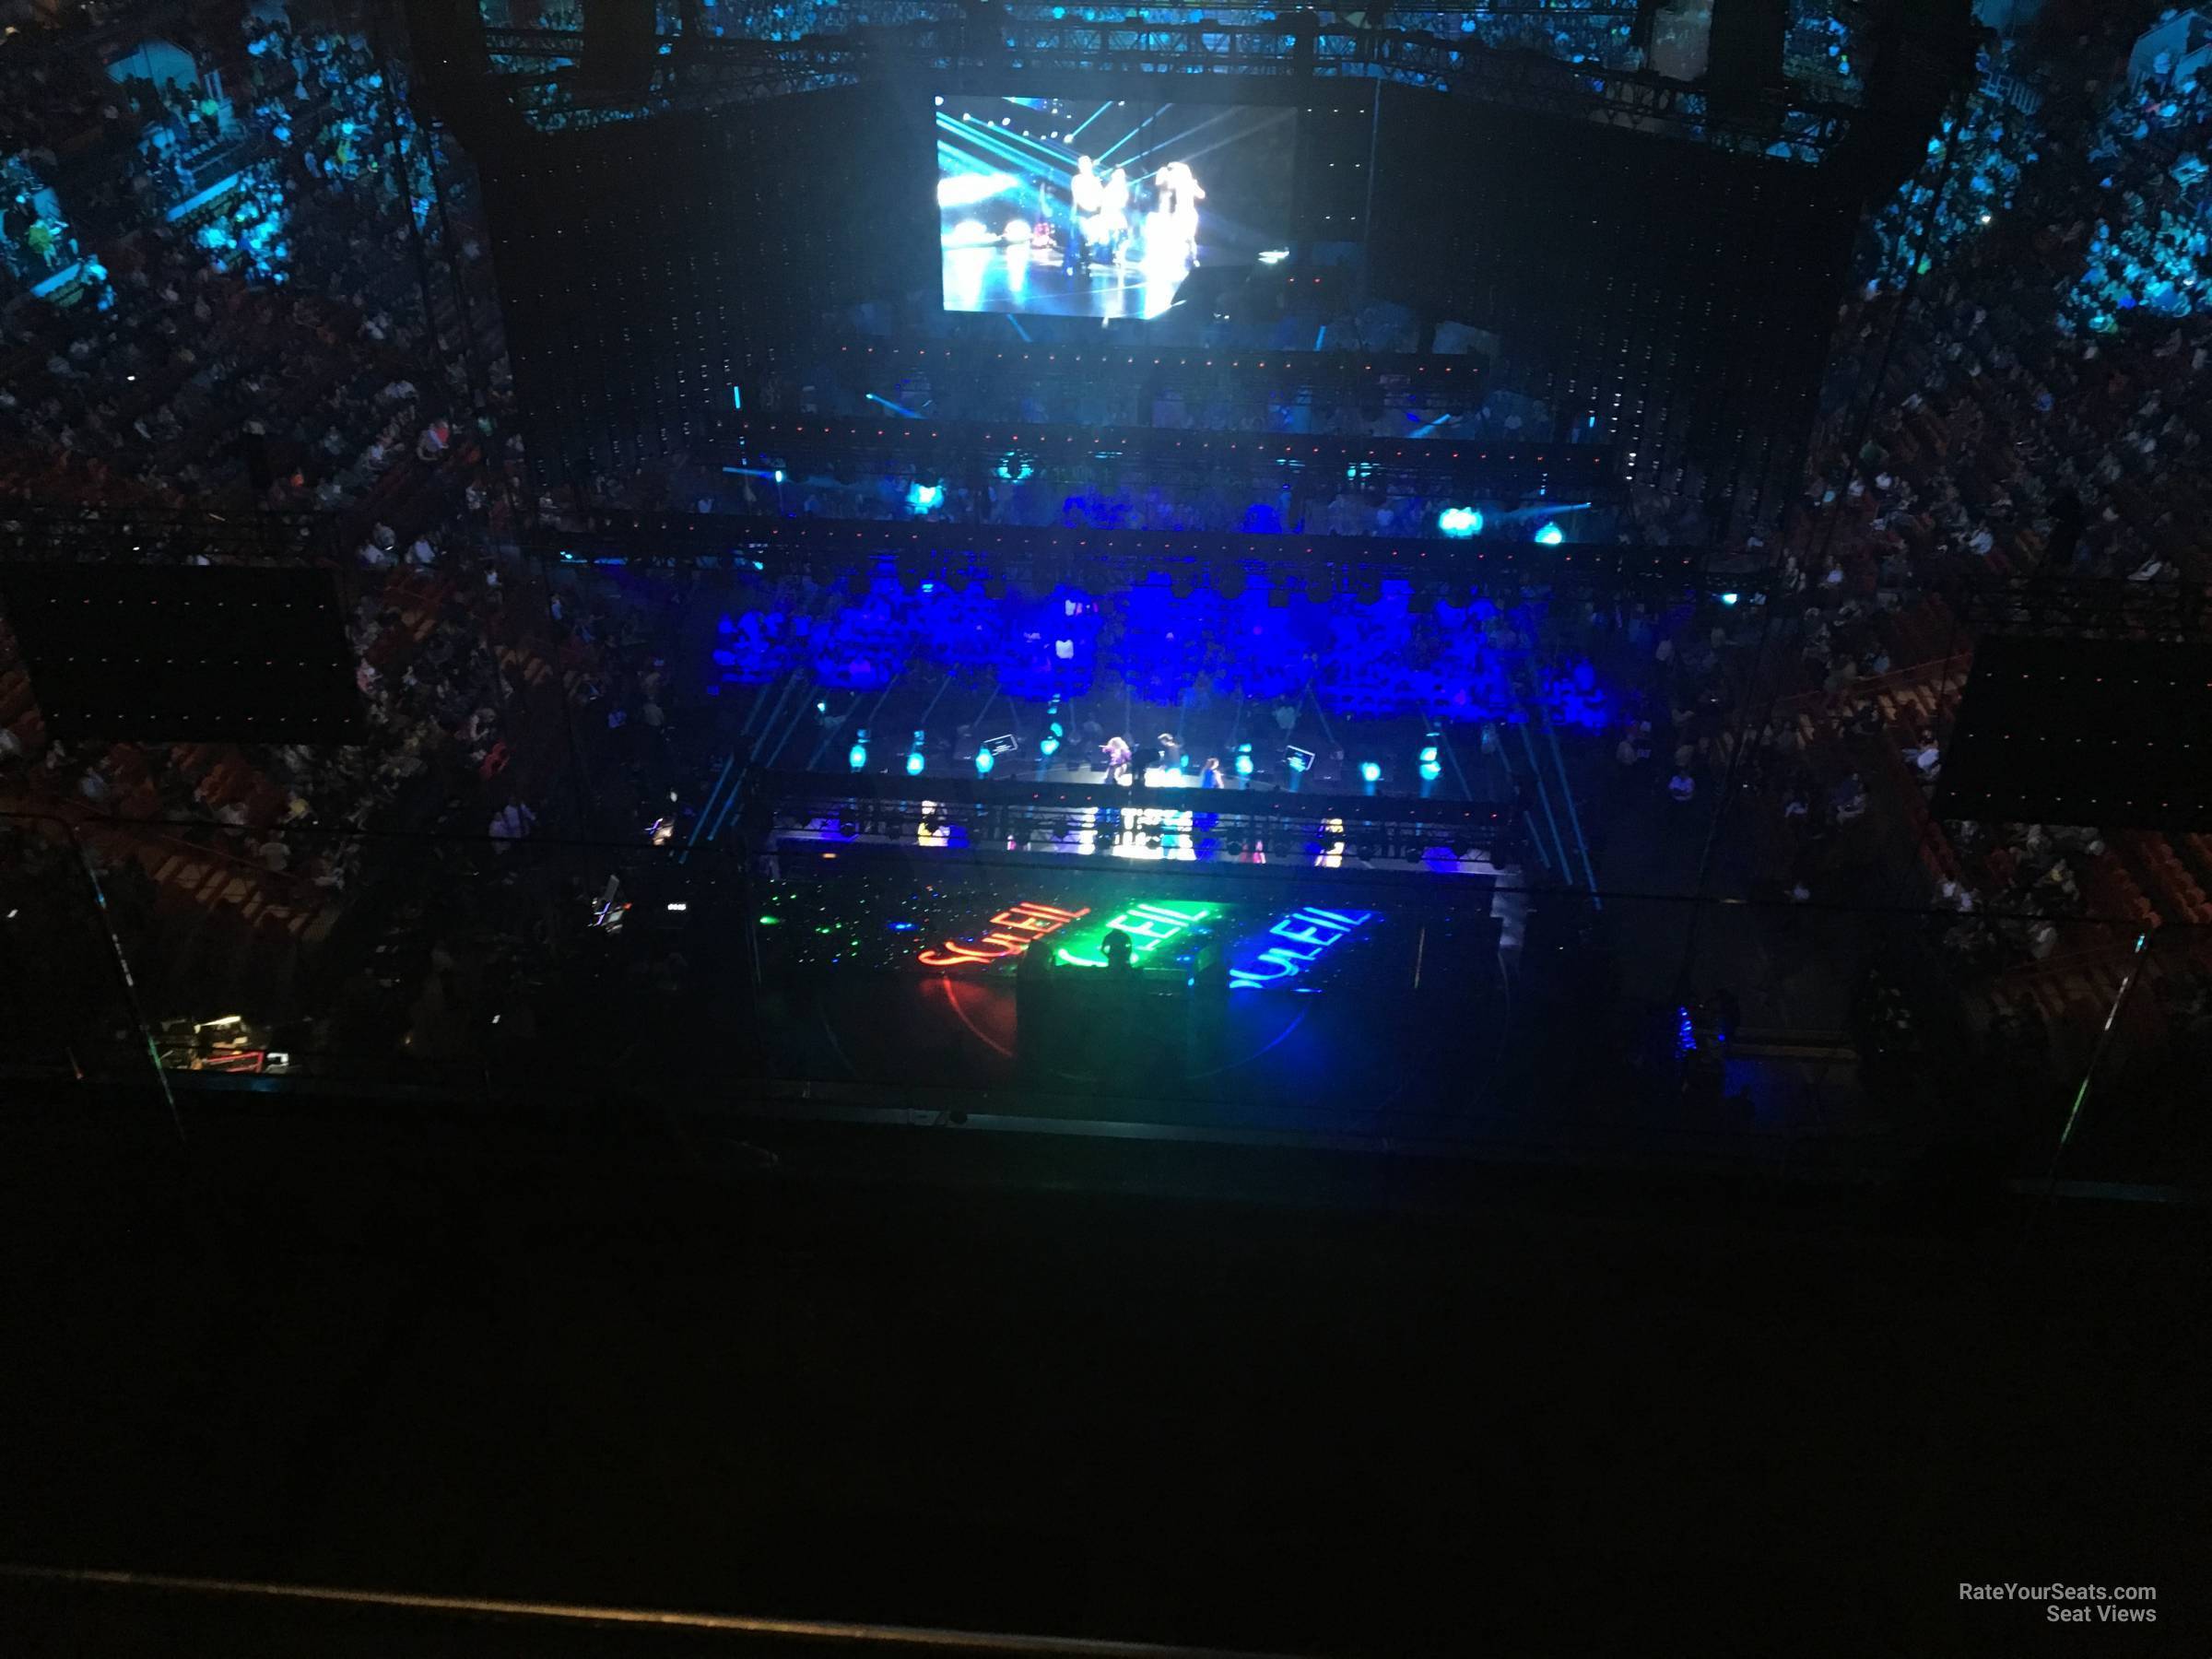 section 405, row 4 seat view  for concert - kaseya center